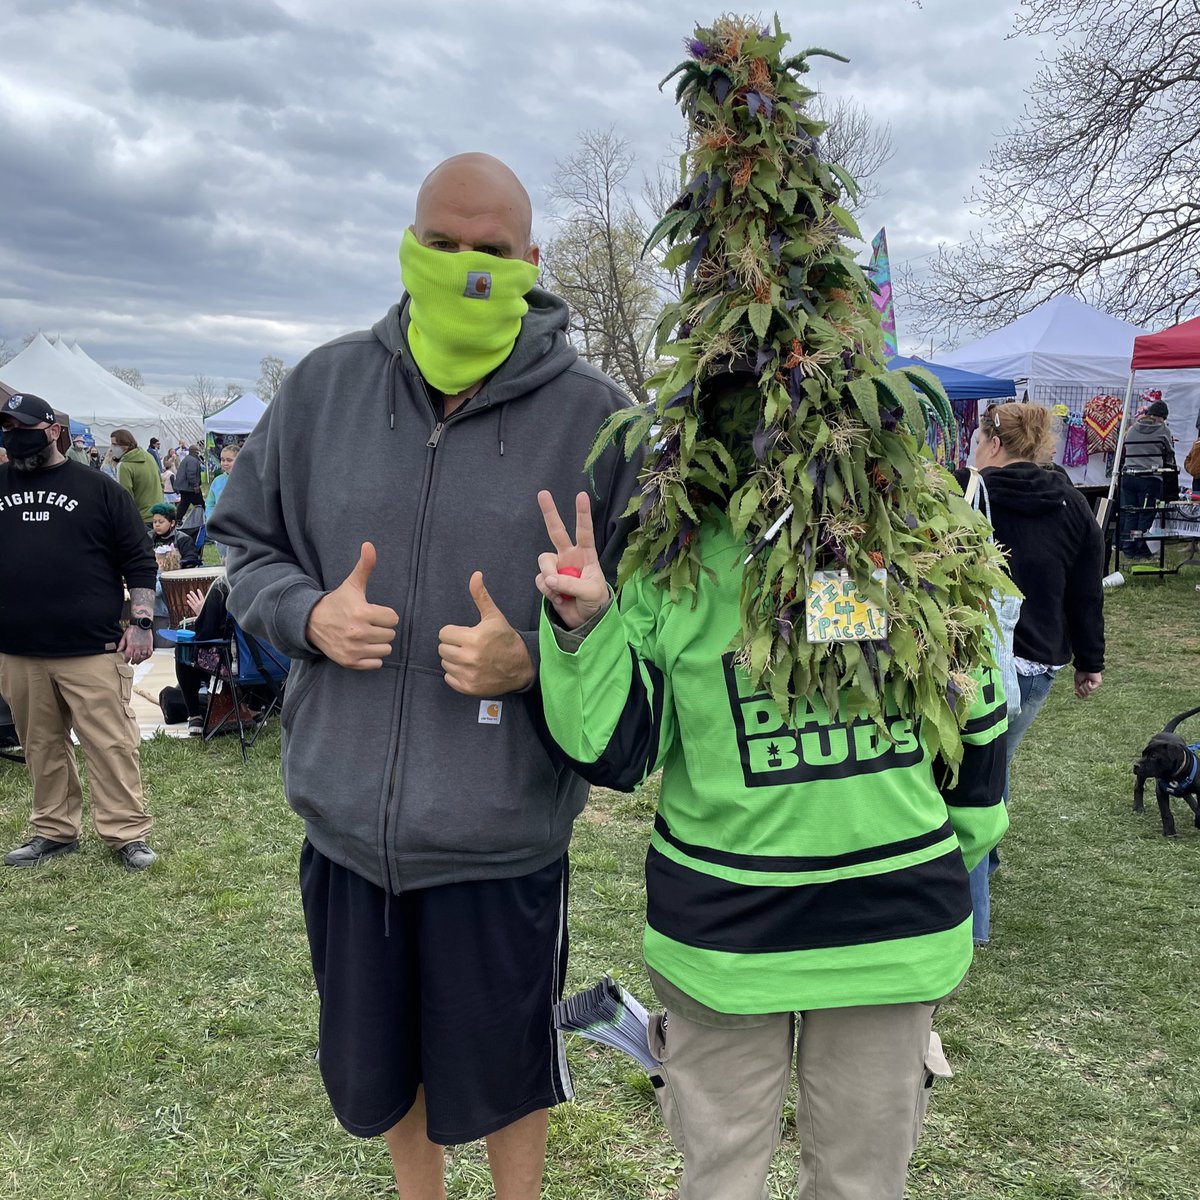 High times at the amazing Pennsylvania Cannabis Festival in Kutztown. 10’s of thousands for legal weed in one of PA’s reddest 🟥 counties. Also, Lance the dog, wanted to meet me. Lance, pro-weed, also has the greatest name for a dog, possibly ever. He’s also a very good boy.